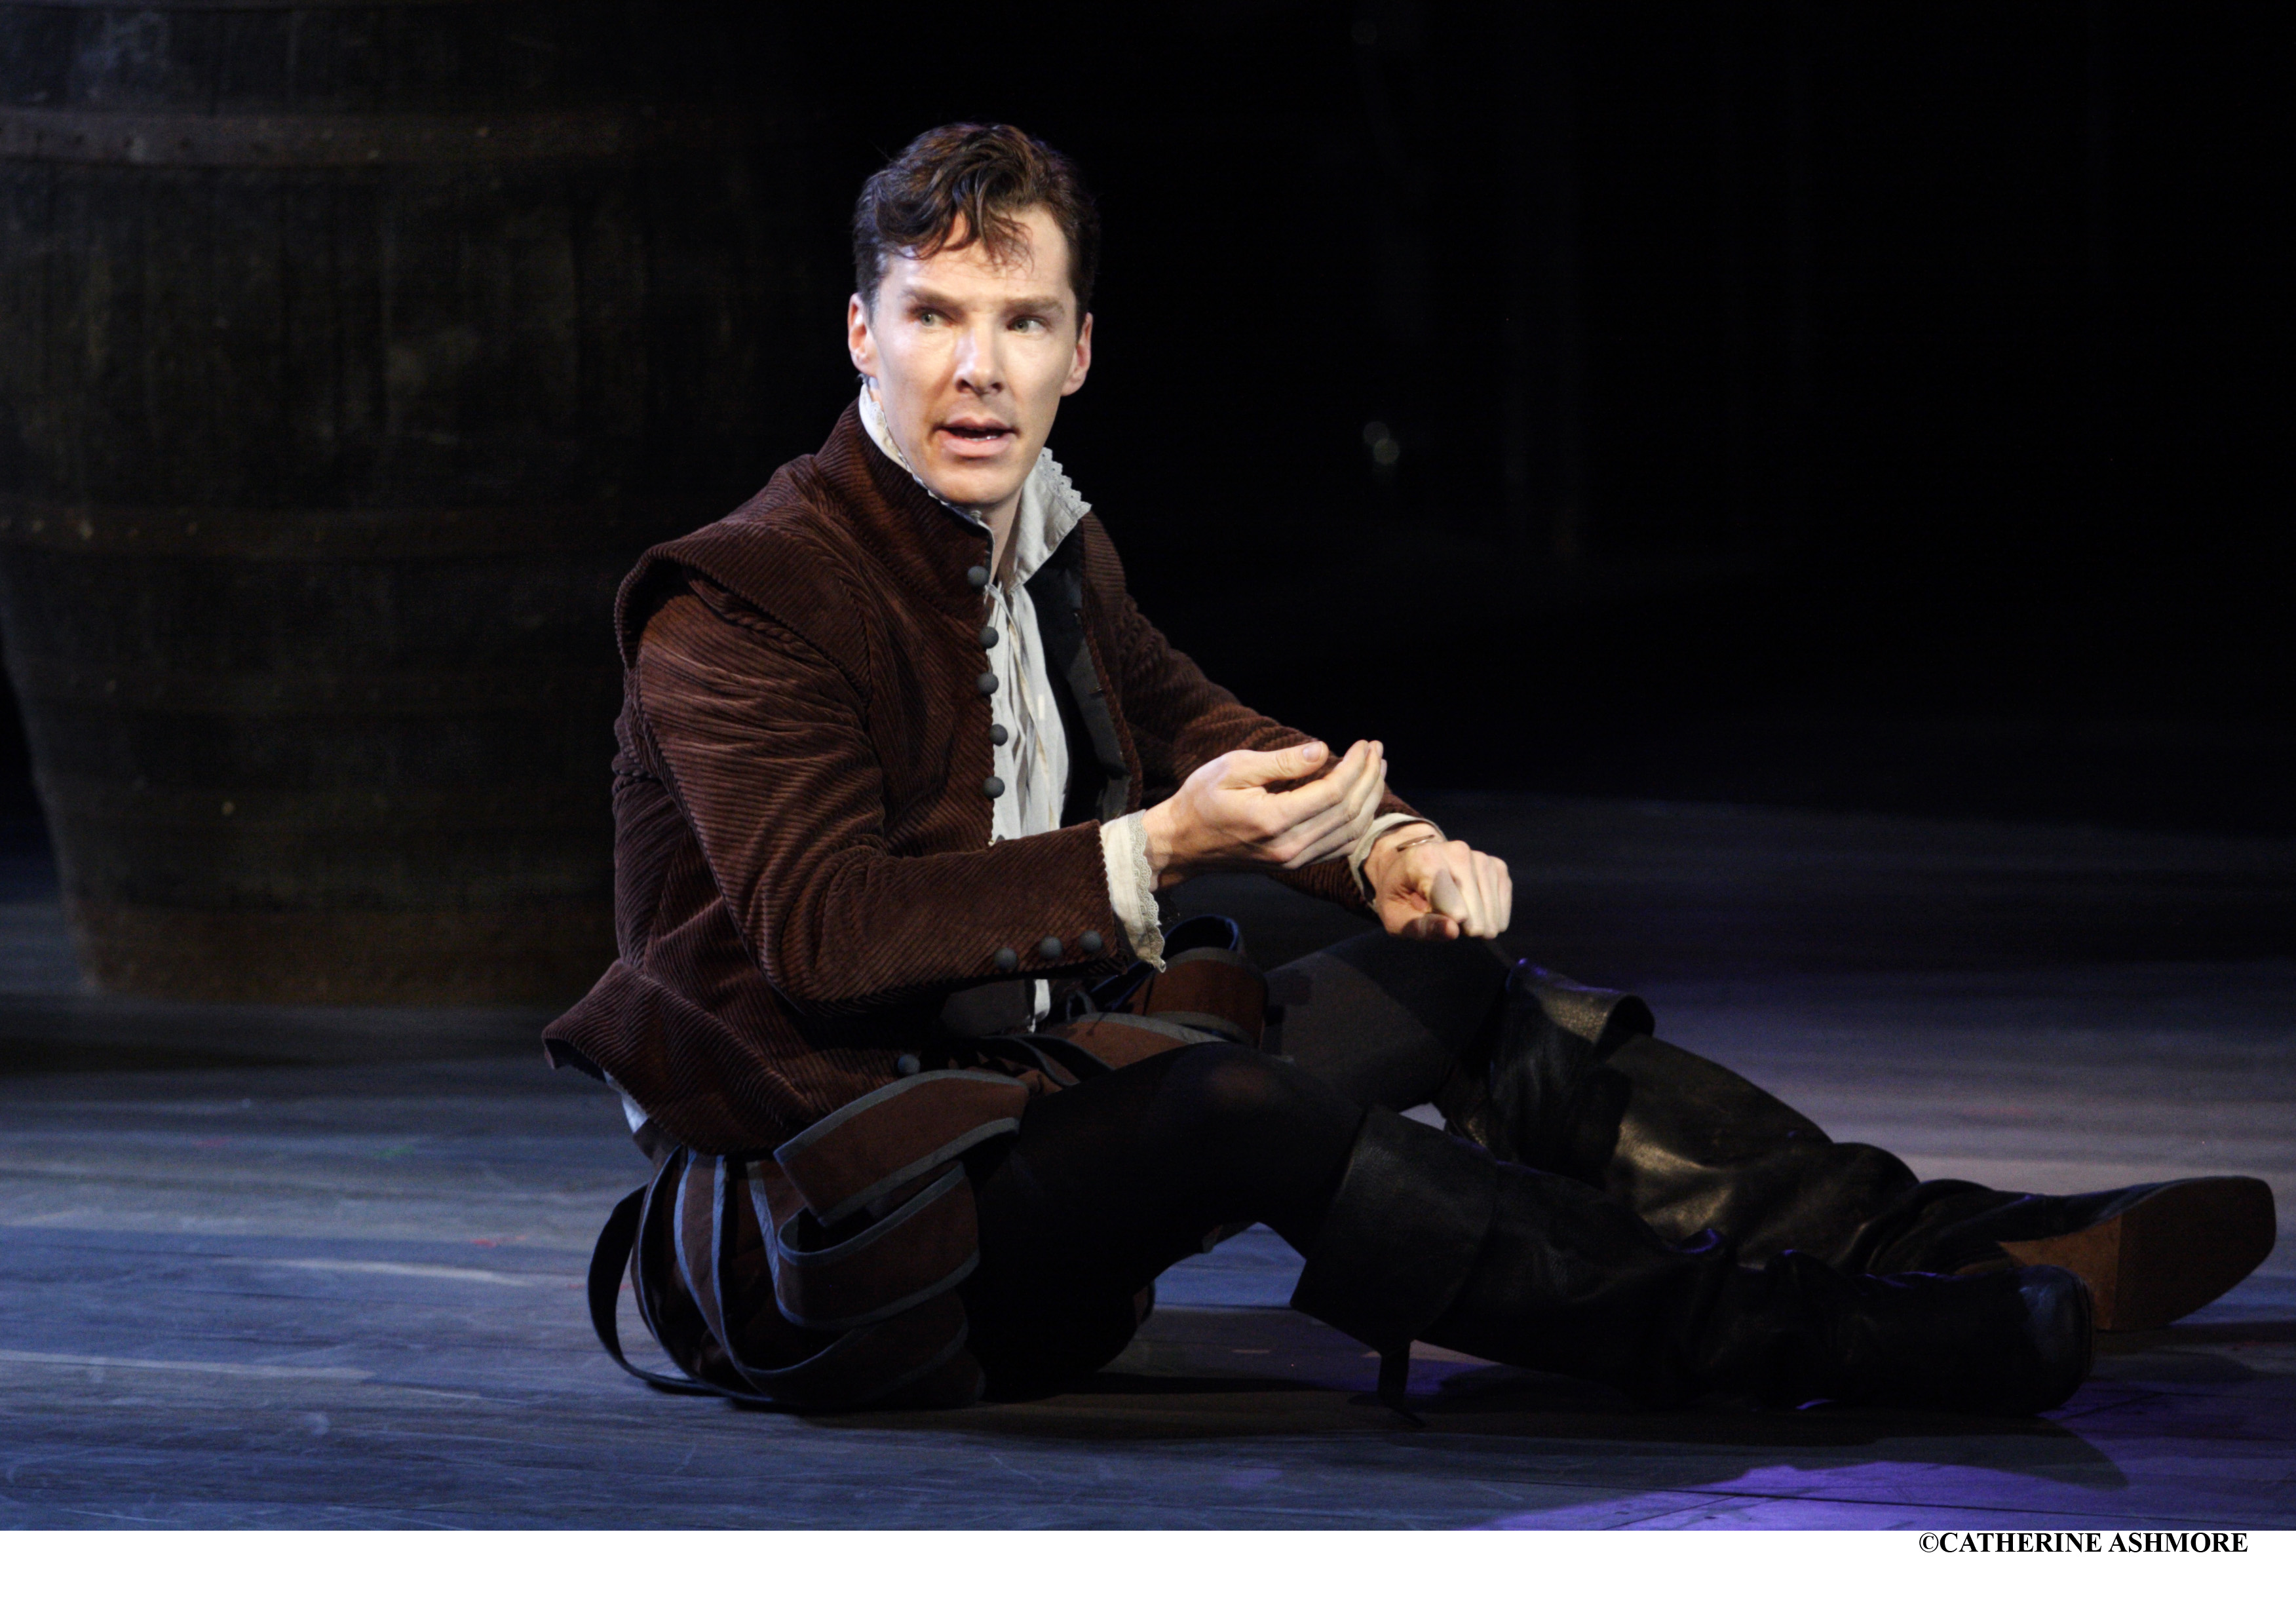 Benedict Cumberbatch in a scene from Tom Stoppard's "Rosencrantz and Guildenstern Are Dead" for the National Theatre 50th anniversary. Will we get a similar look? (Photo: Catherine Ashmore)